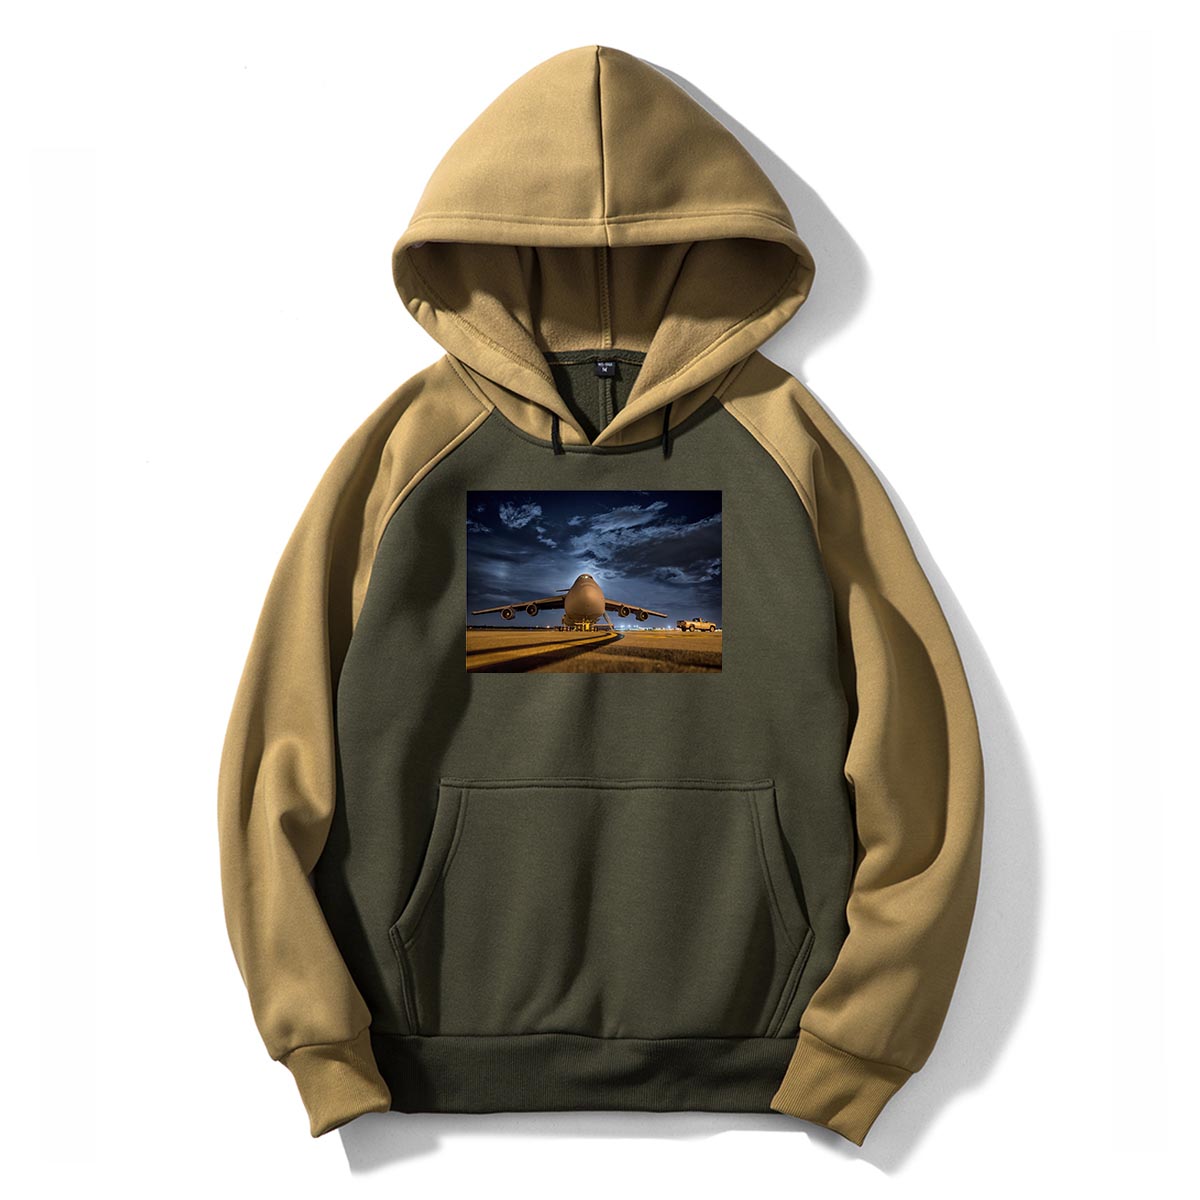 Amazing Military Aircraft at Night Designed Colourful Hoodies